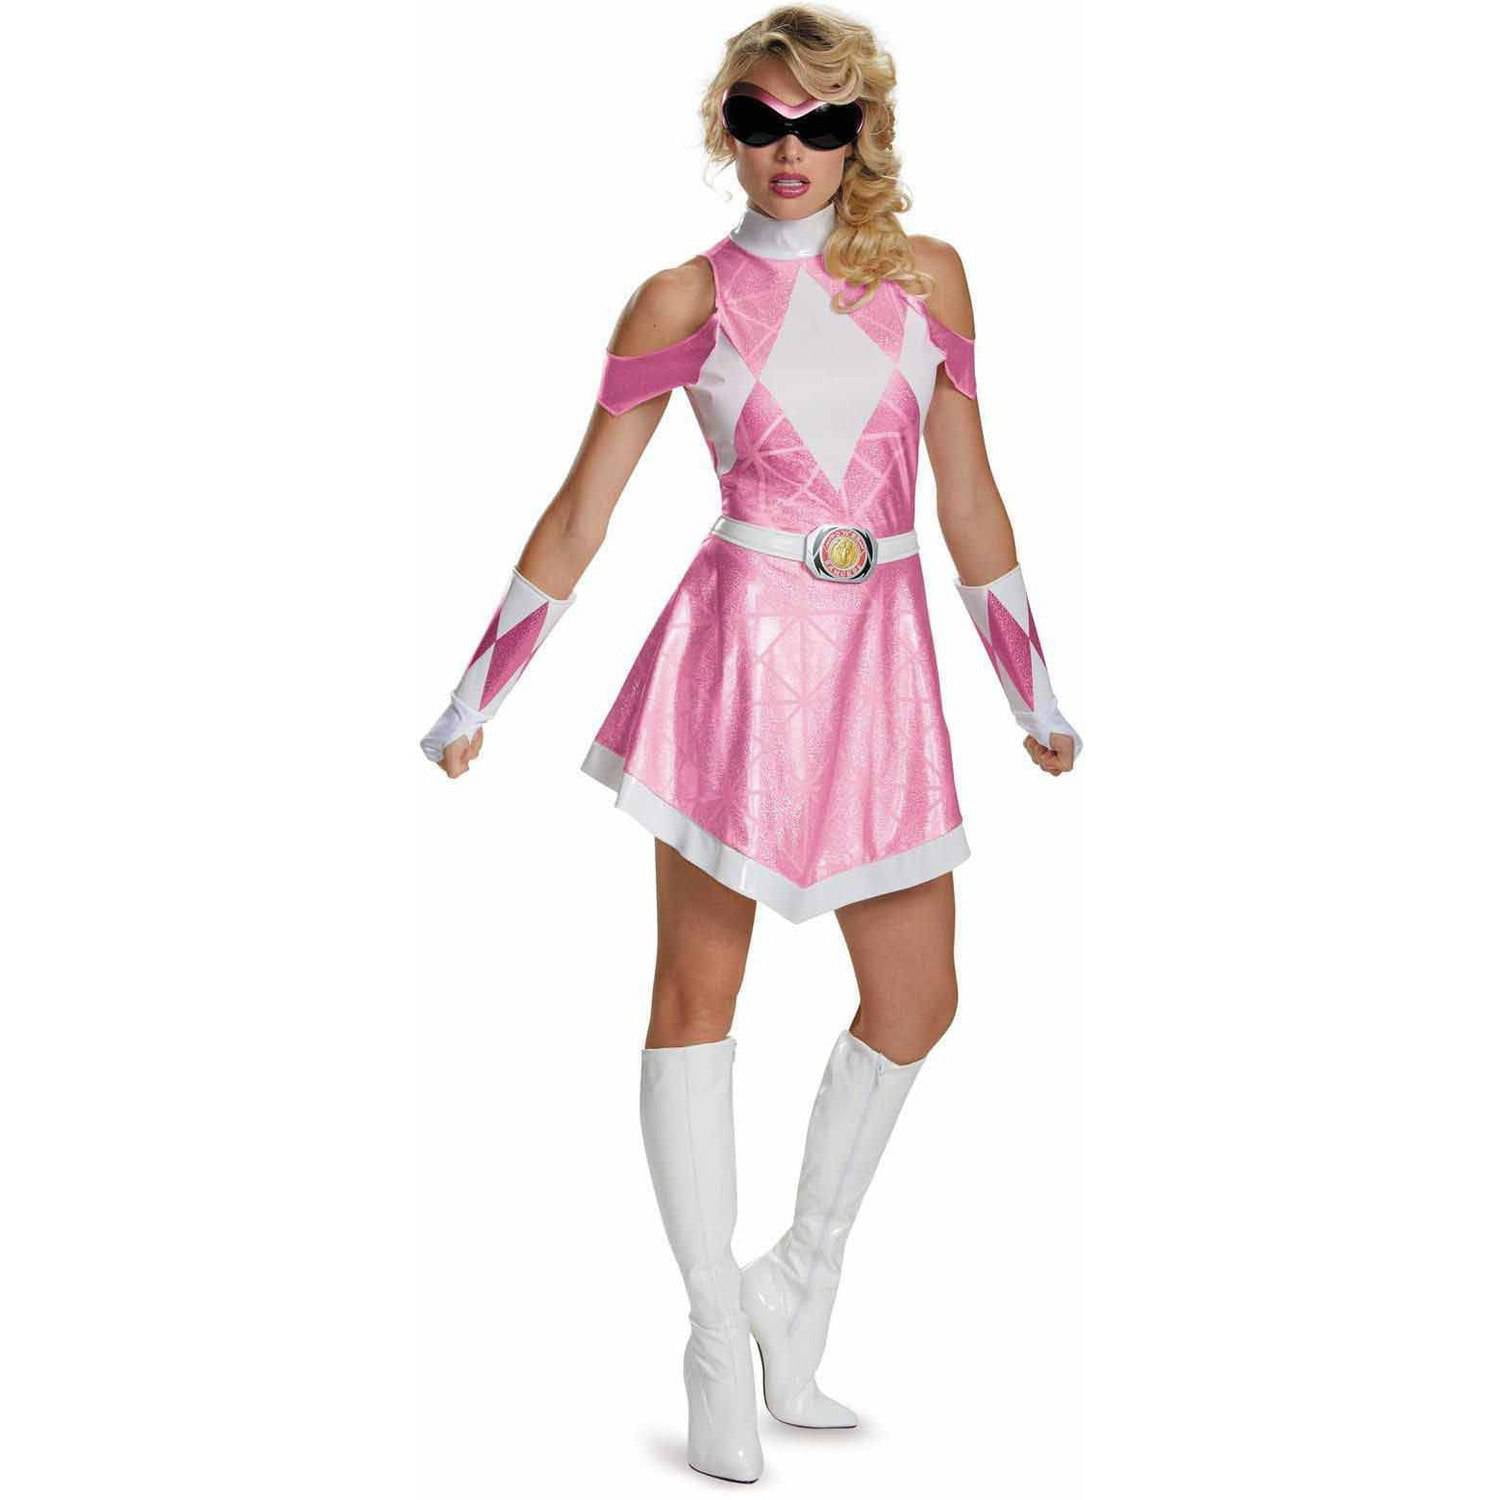 Sabans Mighty Morphin Power Rangers Pink Ranger Bustier Costume Small 4-6 